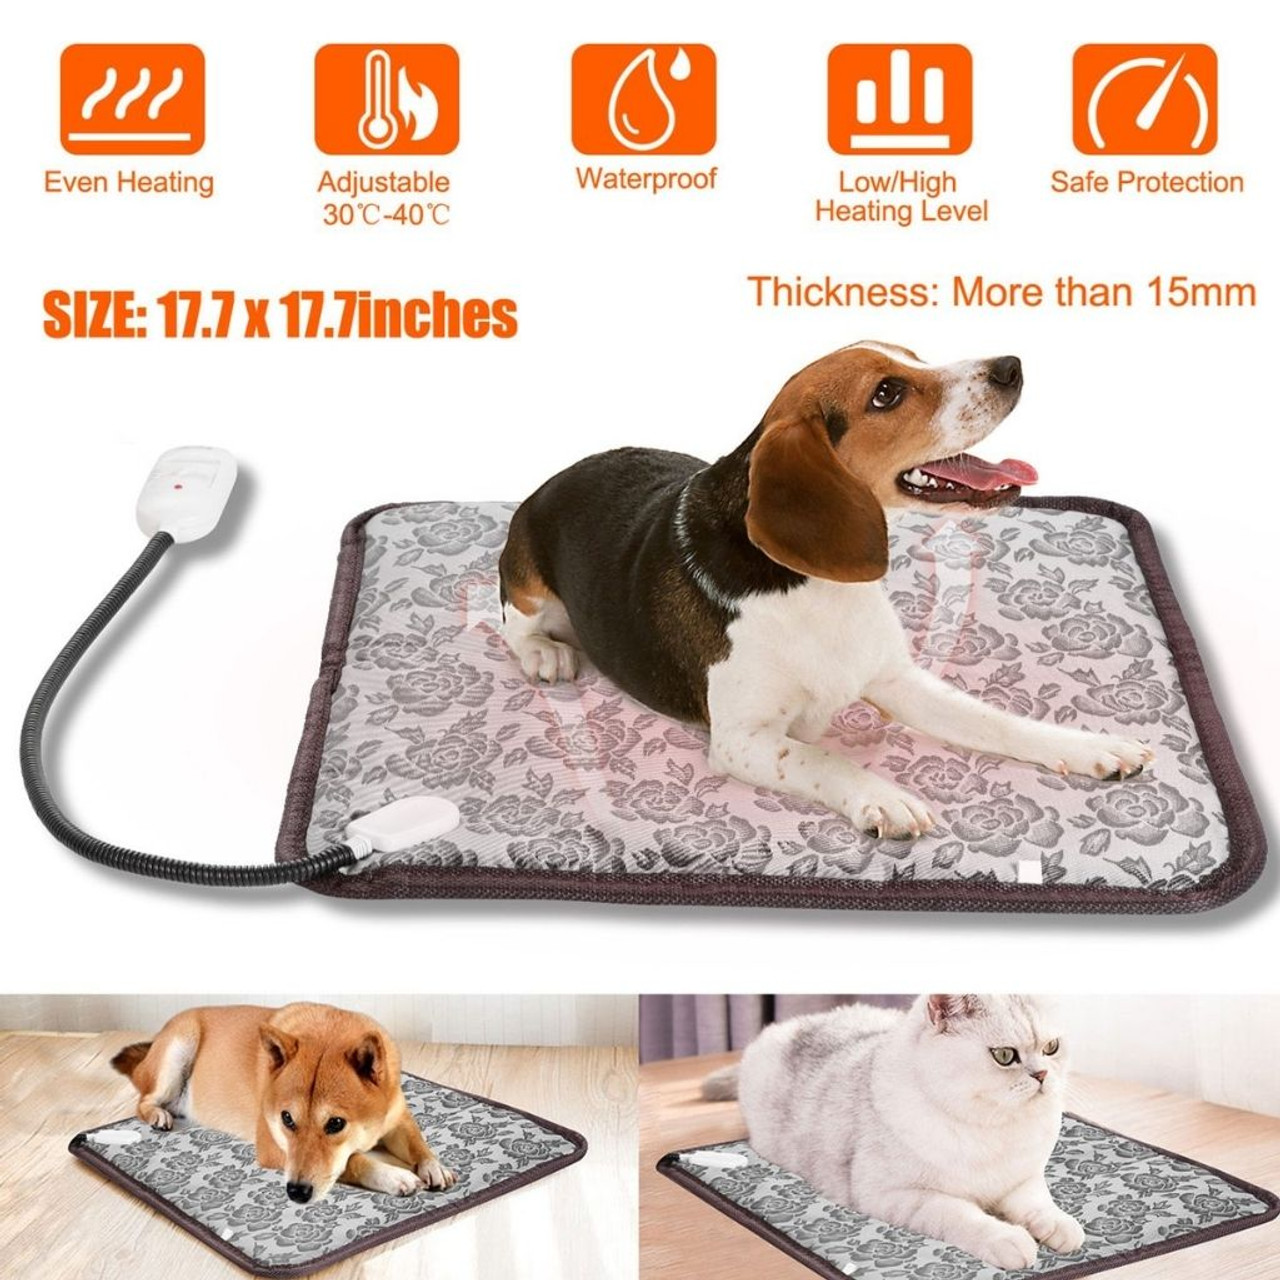 Waterproof Adjustable Electric Heating Pad for Pets product image